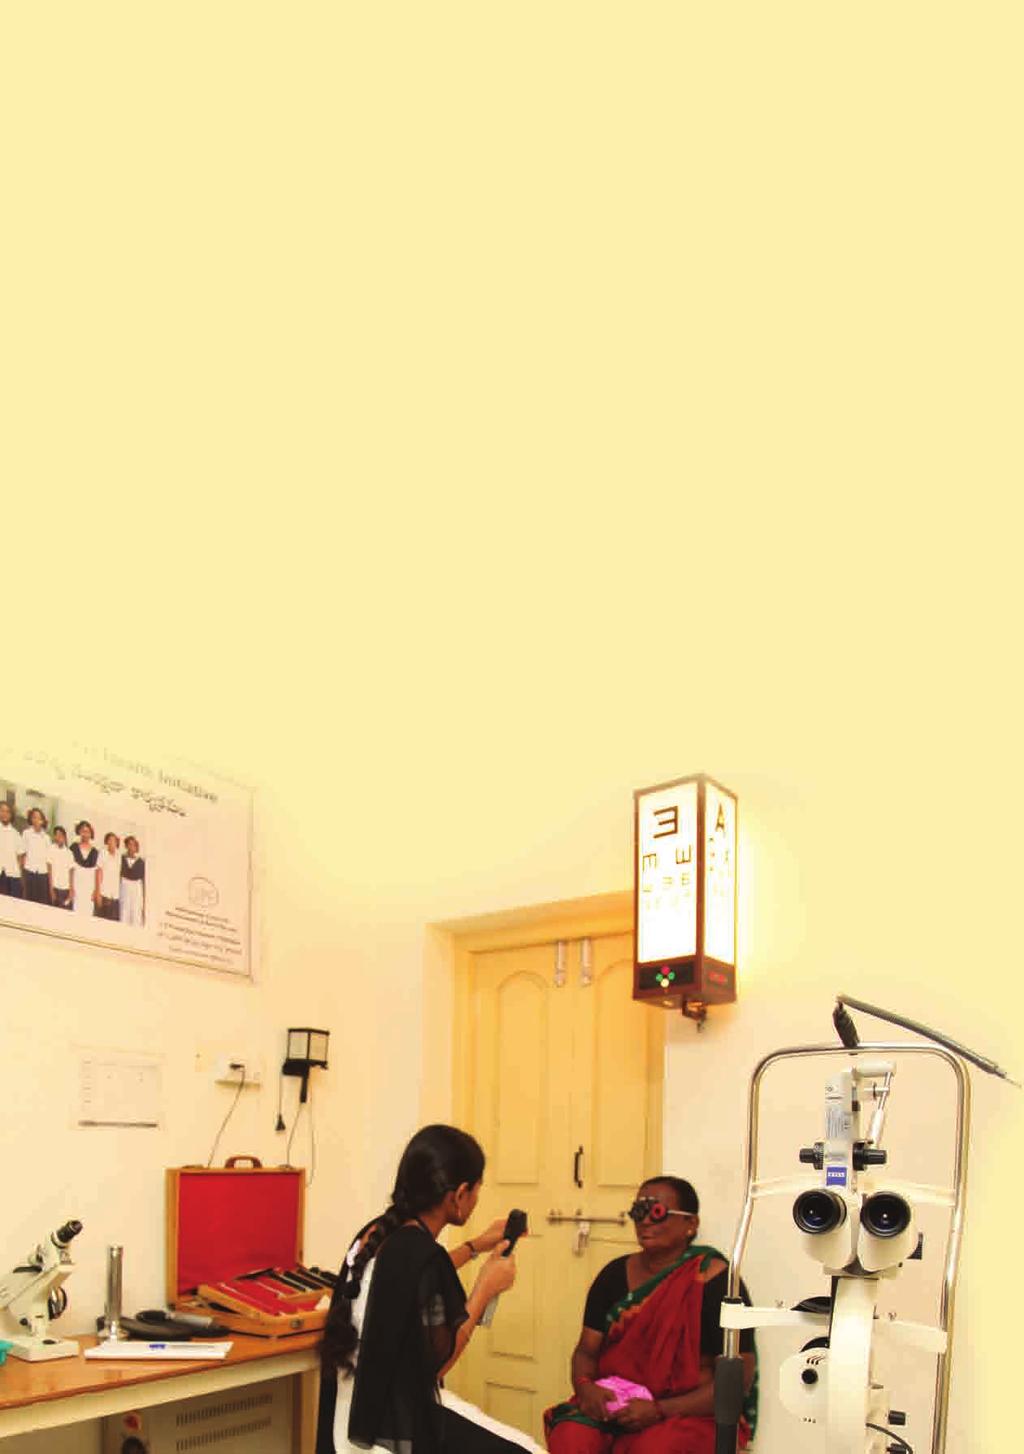 Community & Rural Eye Care Gullapalli Pratibha Rao International Centre for Advancement of Rural Eye Care (GPR- ICARE) This 15 year old of service in community eye care delivery plays a crucial role